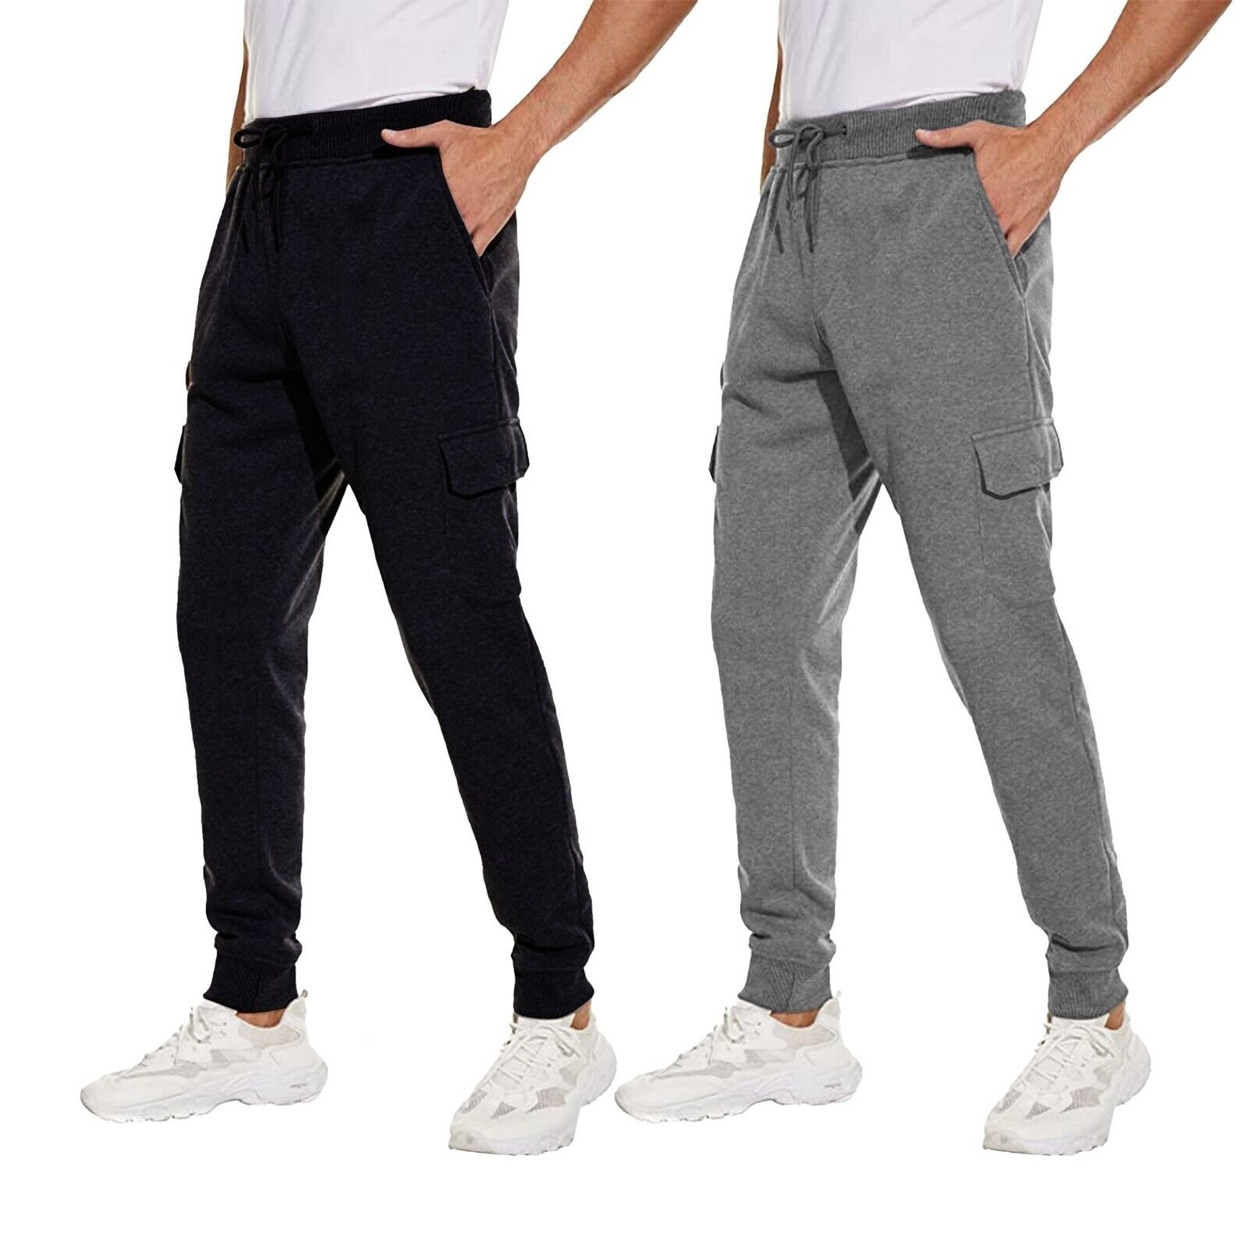 2-Pack Men's Ultra Soft Winter Warm Thick Athletic Sherpa Lined Jogger Pants - Black&grey, Xx-large